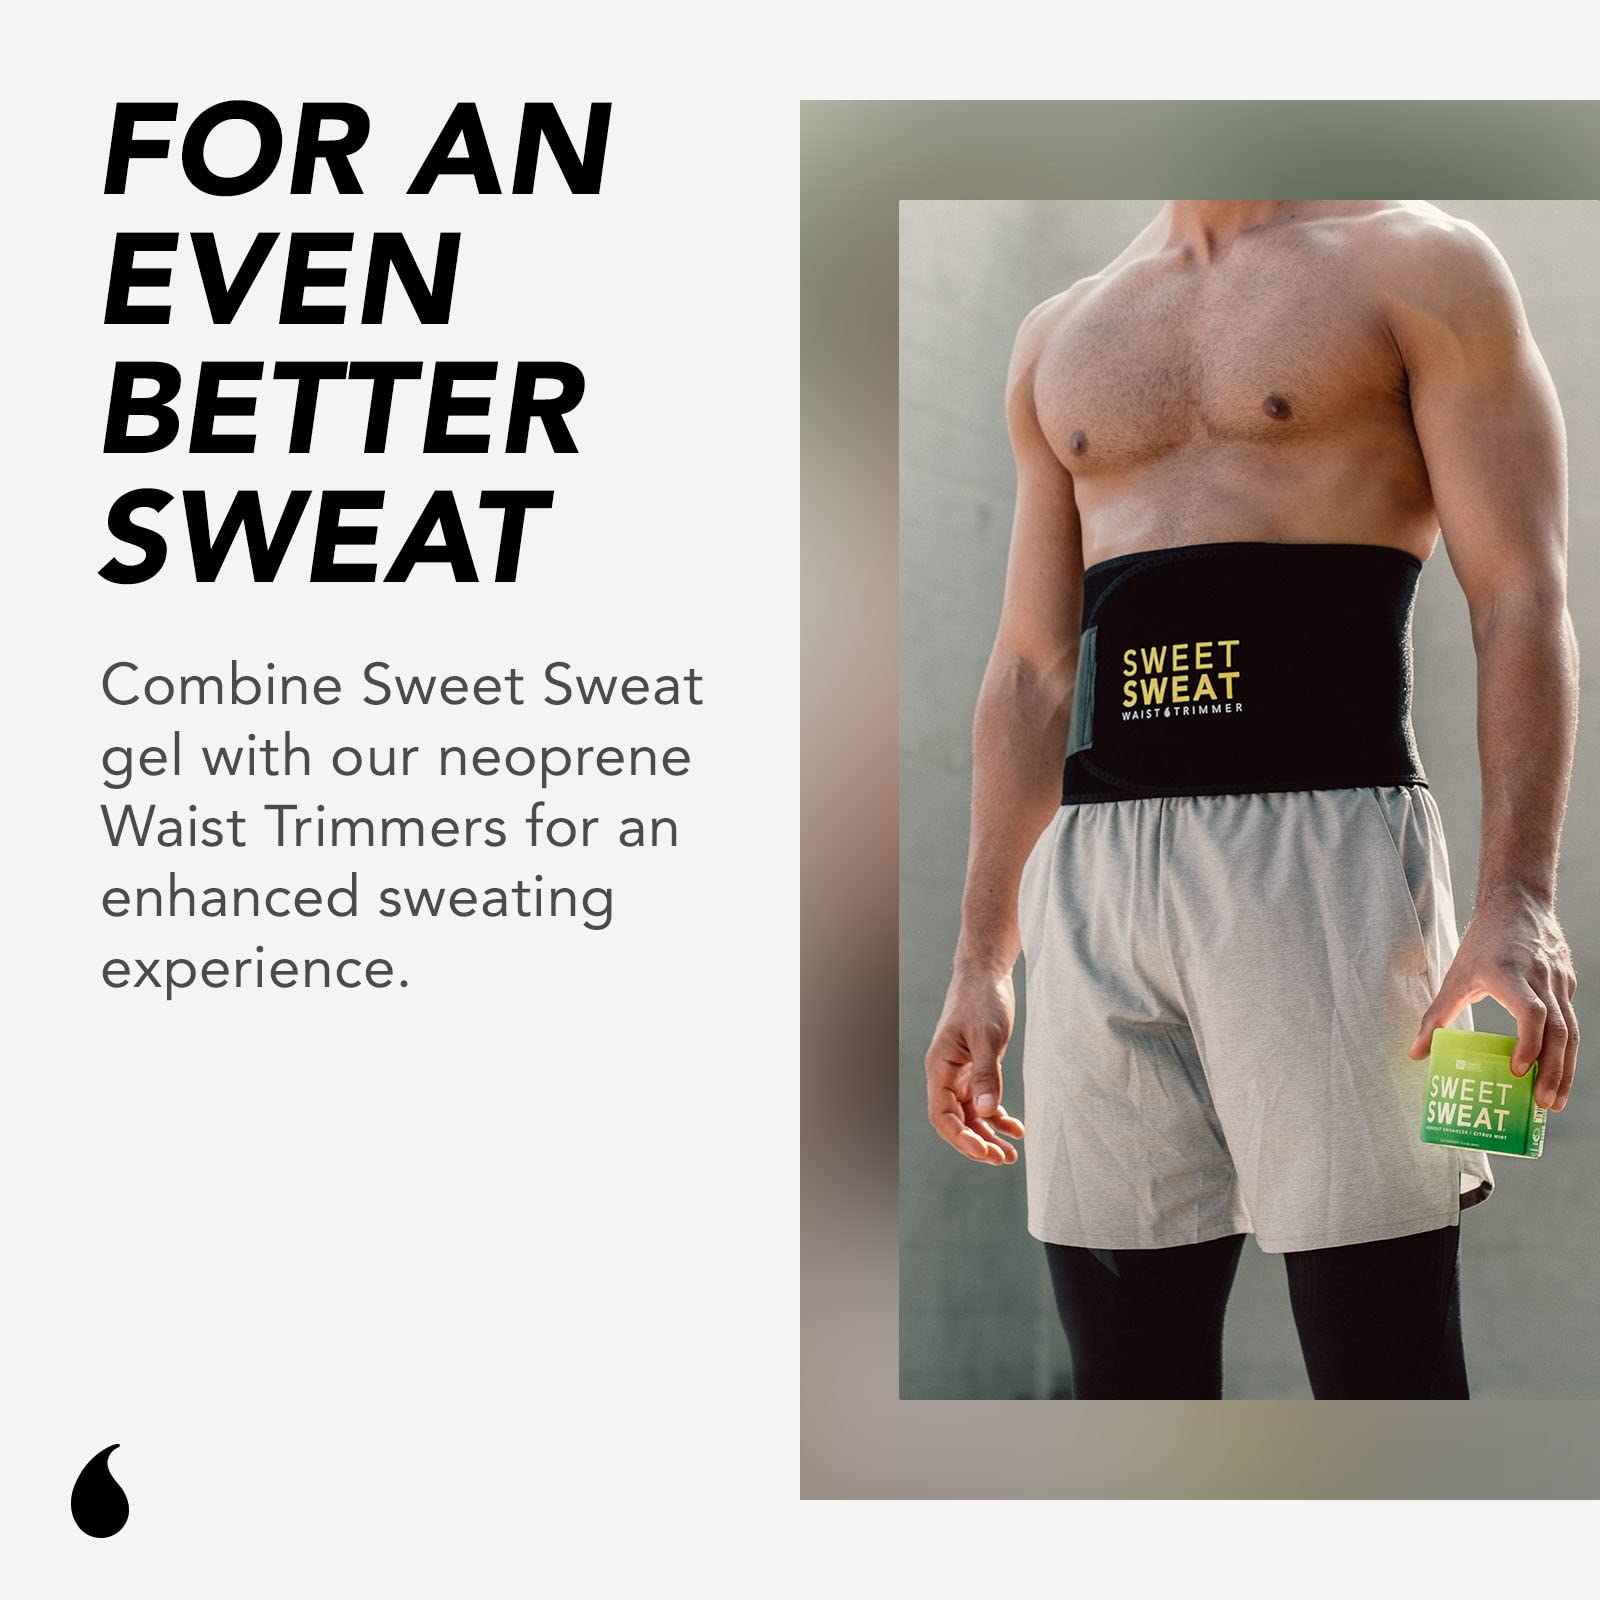 Sweet Sweat Workout Enhancer Gel - Makes You Sweat Harder and Faster, Helps Promote Water Weight Loss, Use with Sweet Sweat Waist Trimmer Sauna Suit - 13.5oz Jar